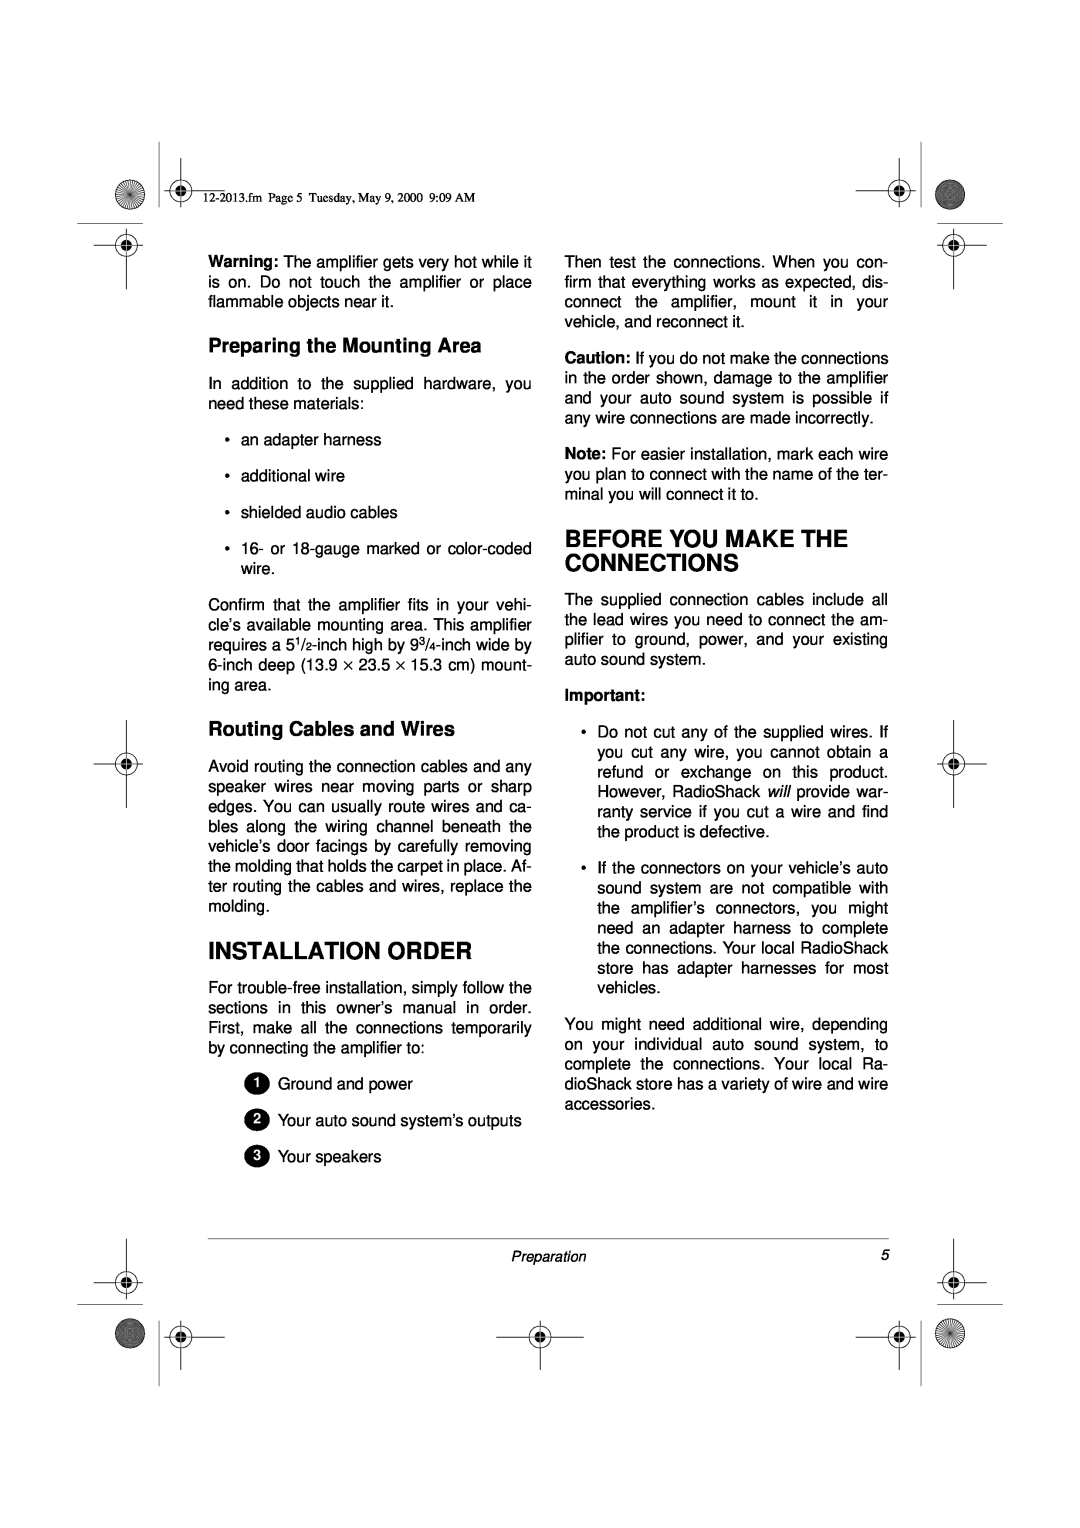 Radio Shack XL-50 owner manual Installation Order, Before You Make The Connections, Preparing the Mounting Area 